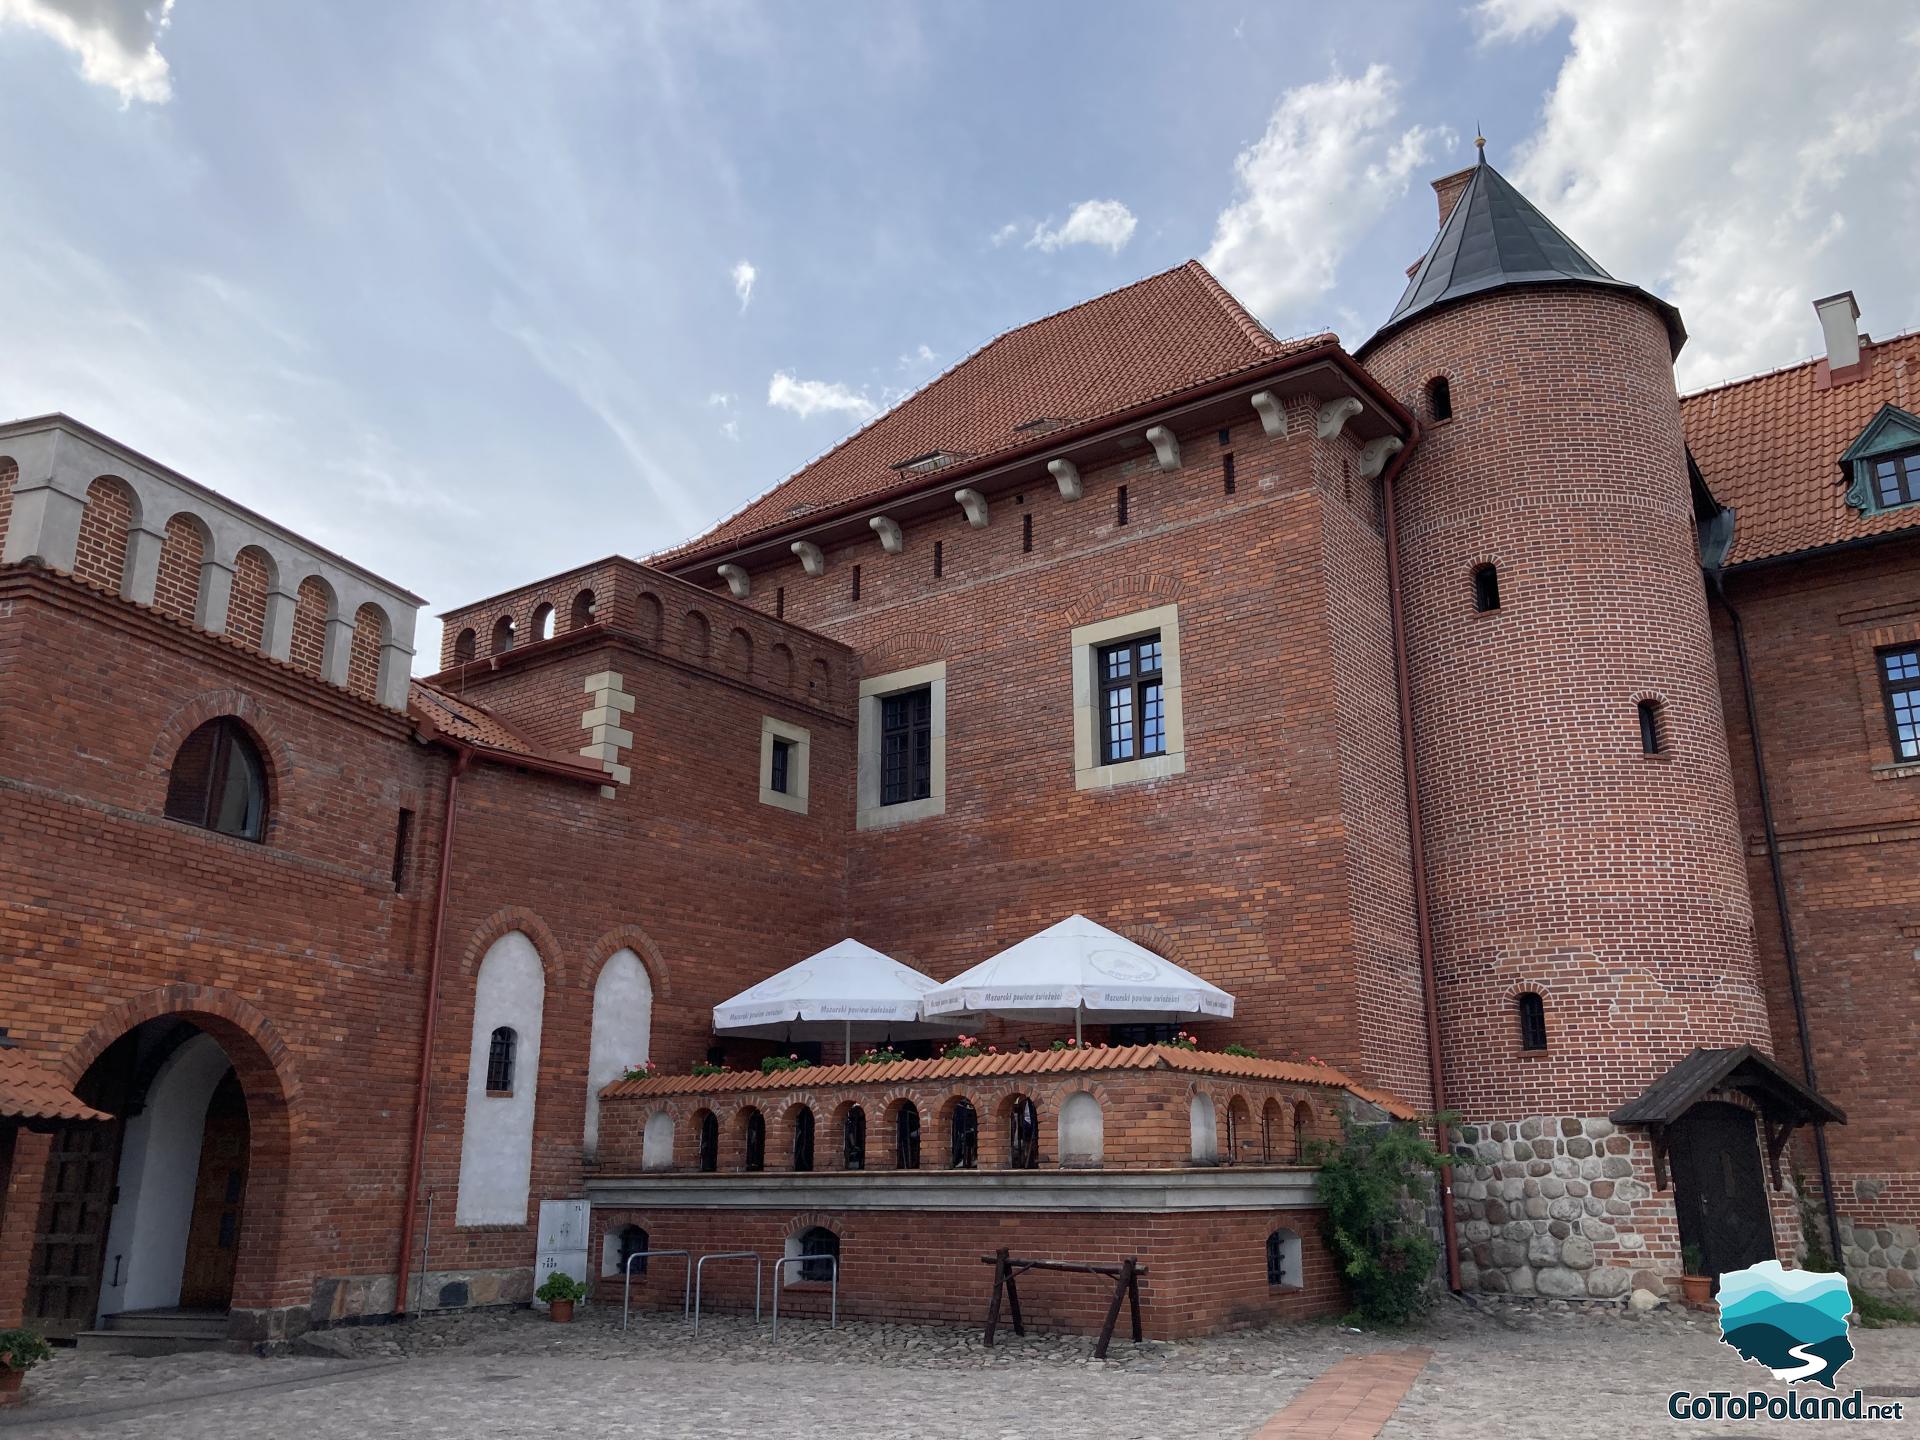 a castle made of red bricks